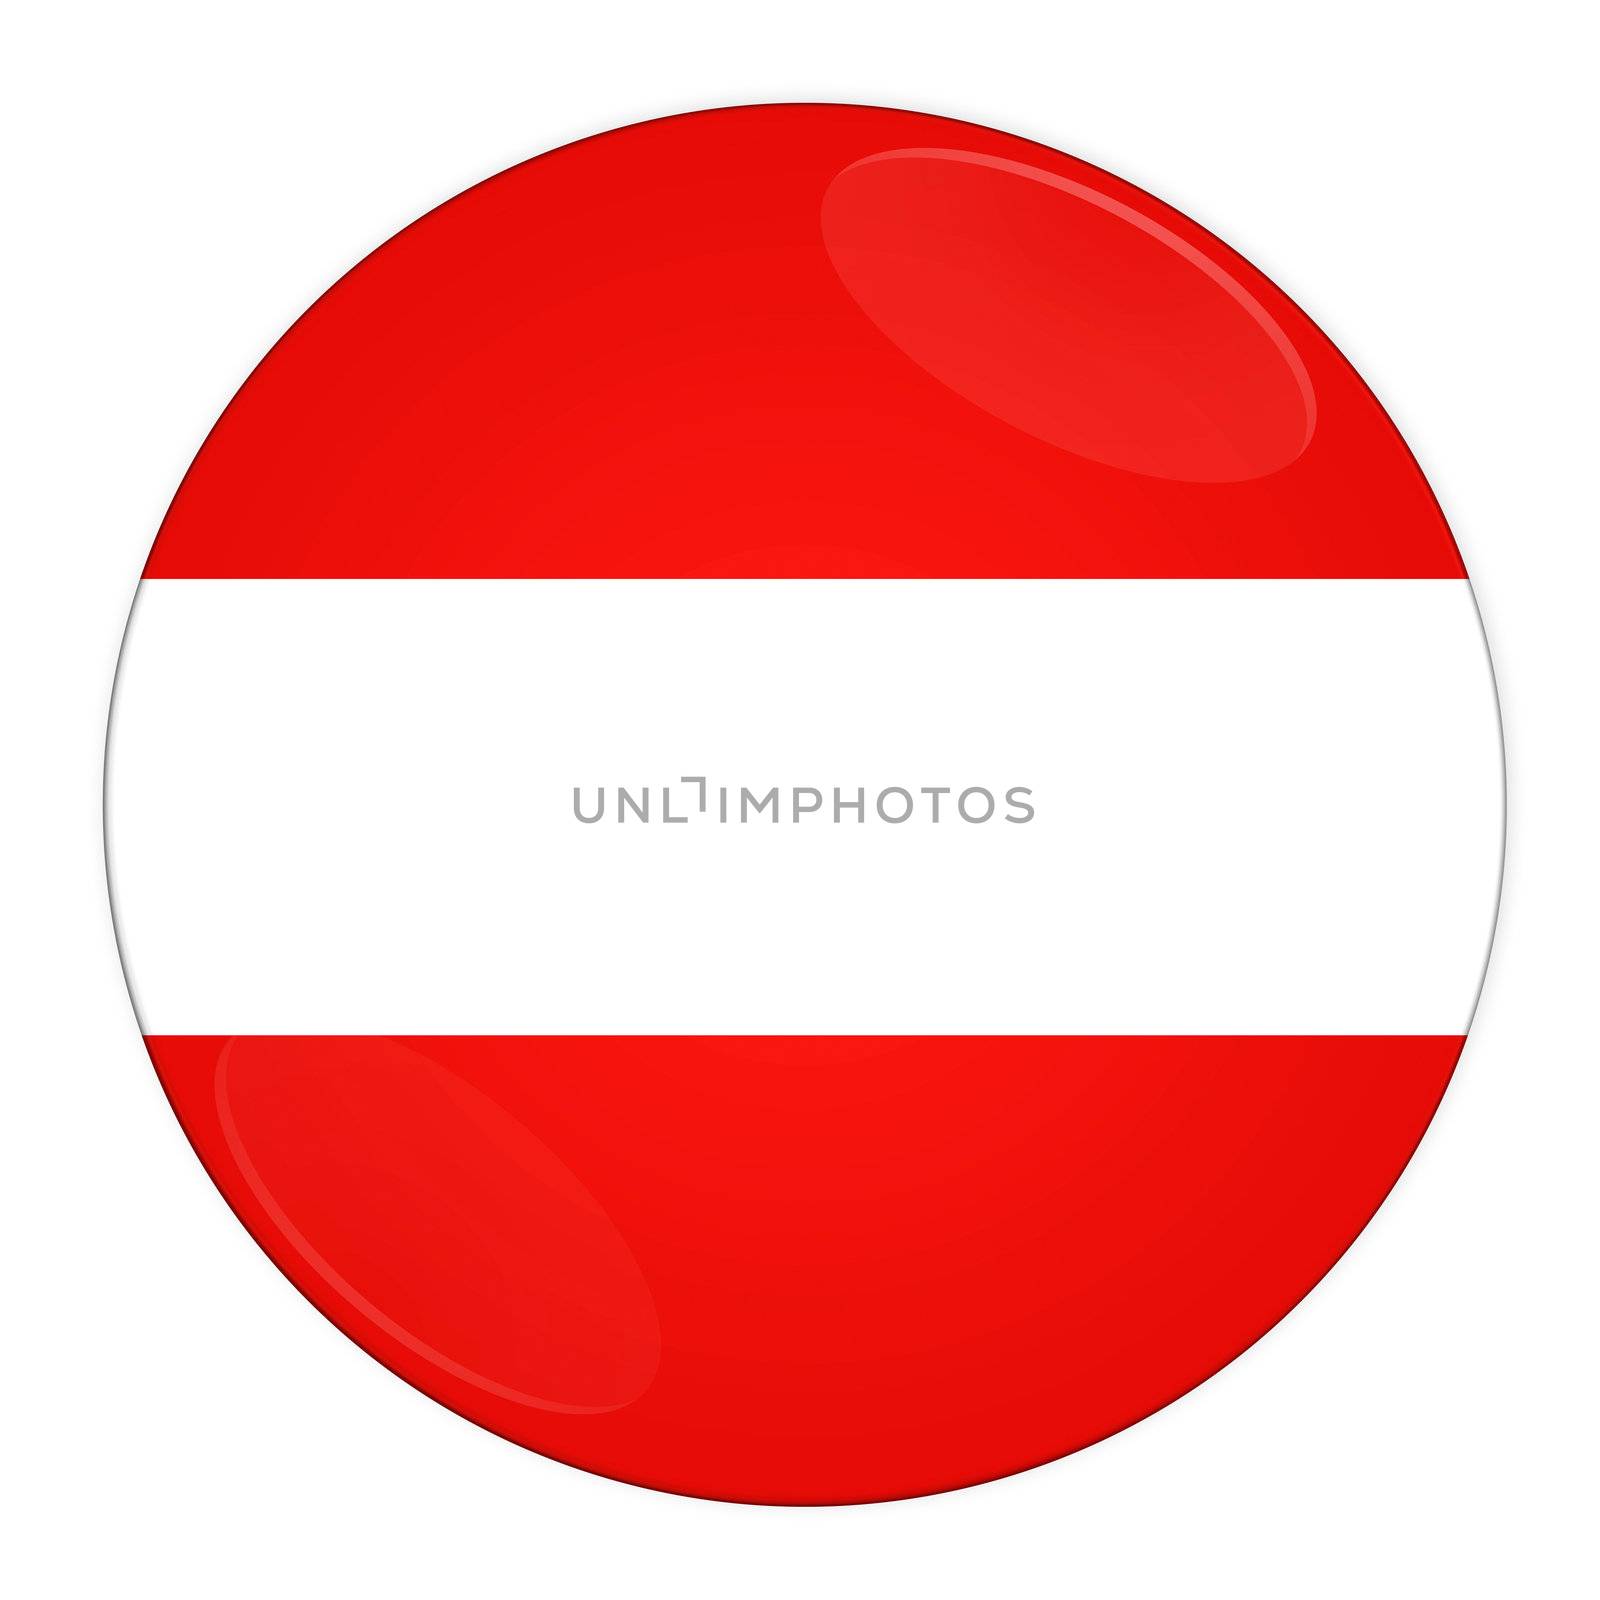 Austria button with flag by rusak